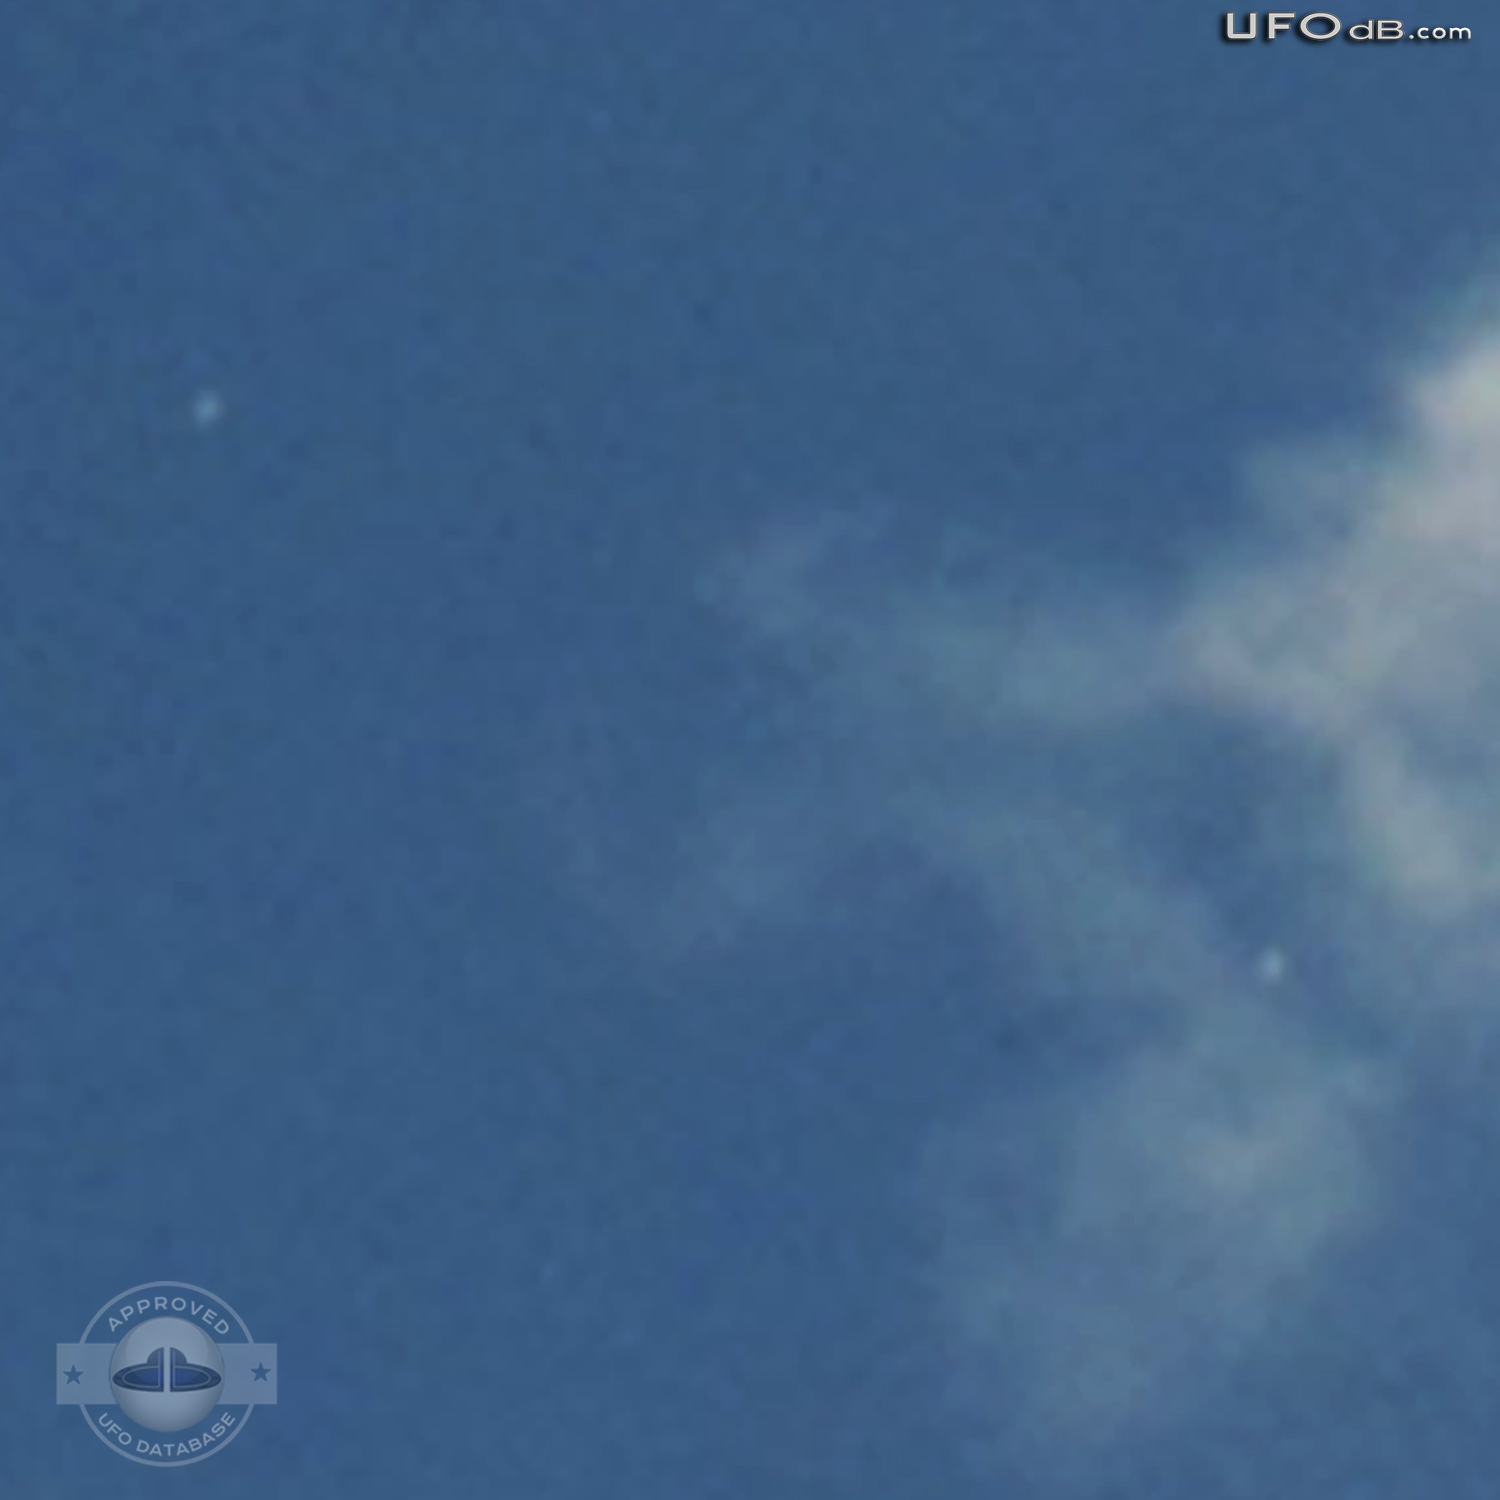 White disc UFOs hides behind clouds Davao Philippines November 3 2010 UFO Picture #340-5